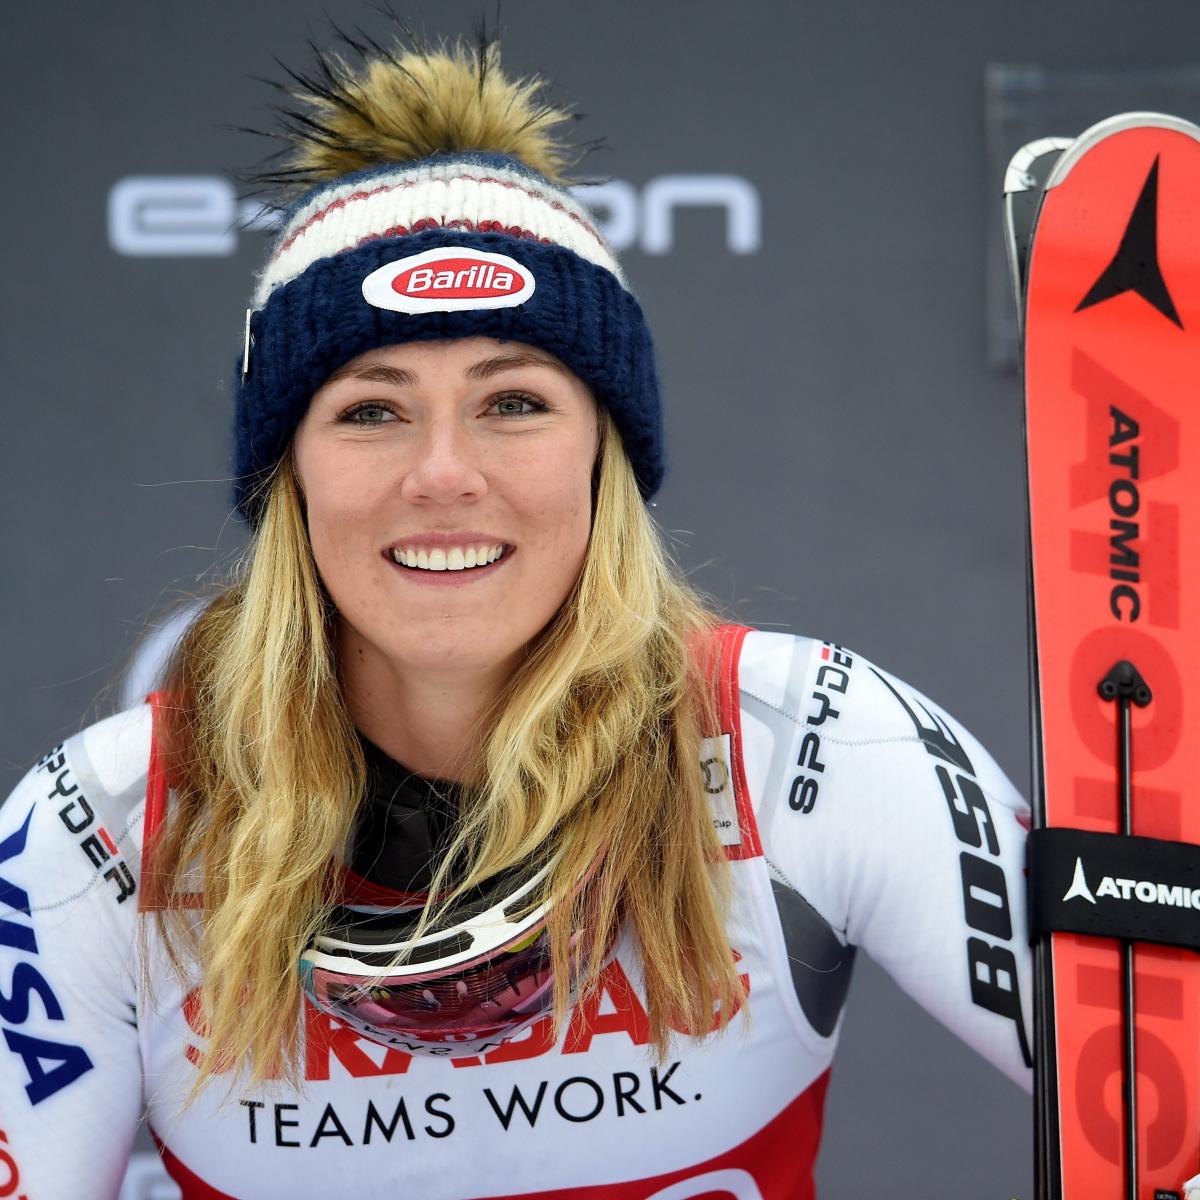 Skier Mikaela Shiffrin Breaks 30Year Record with 15th